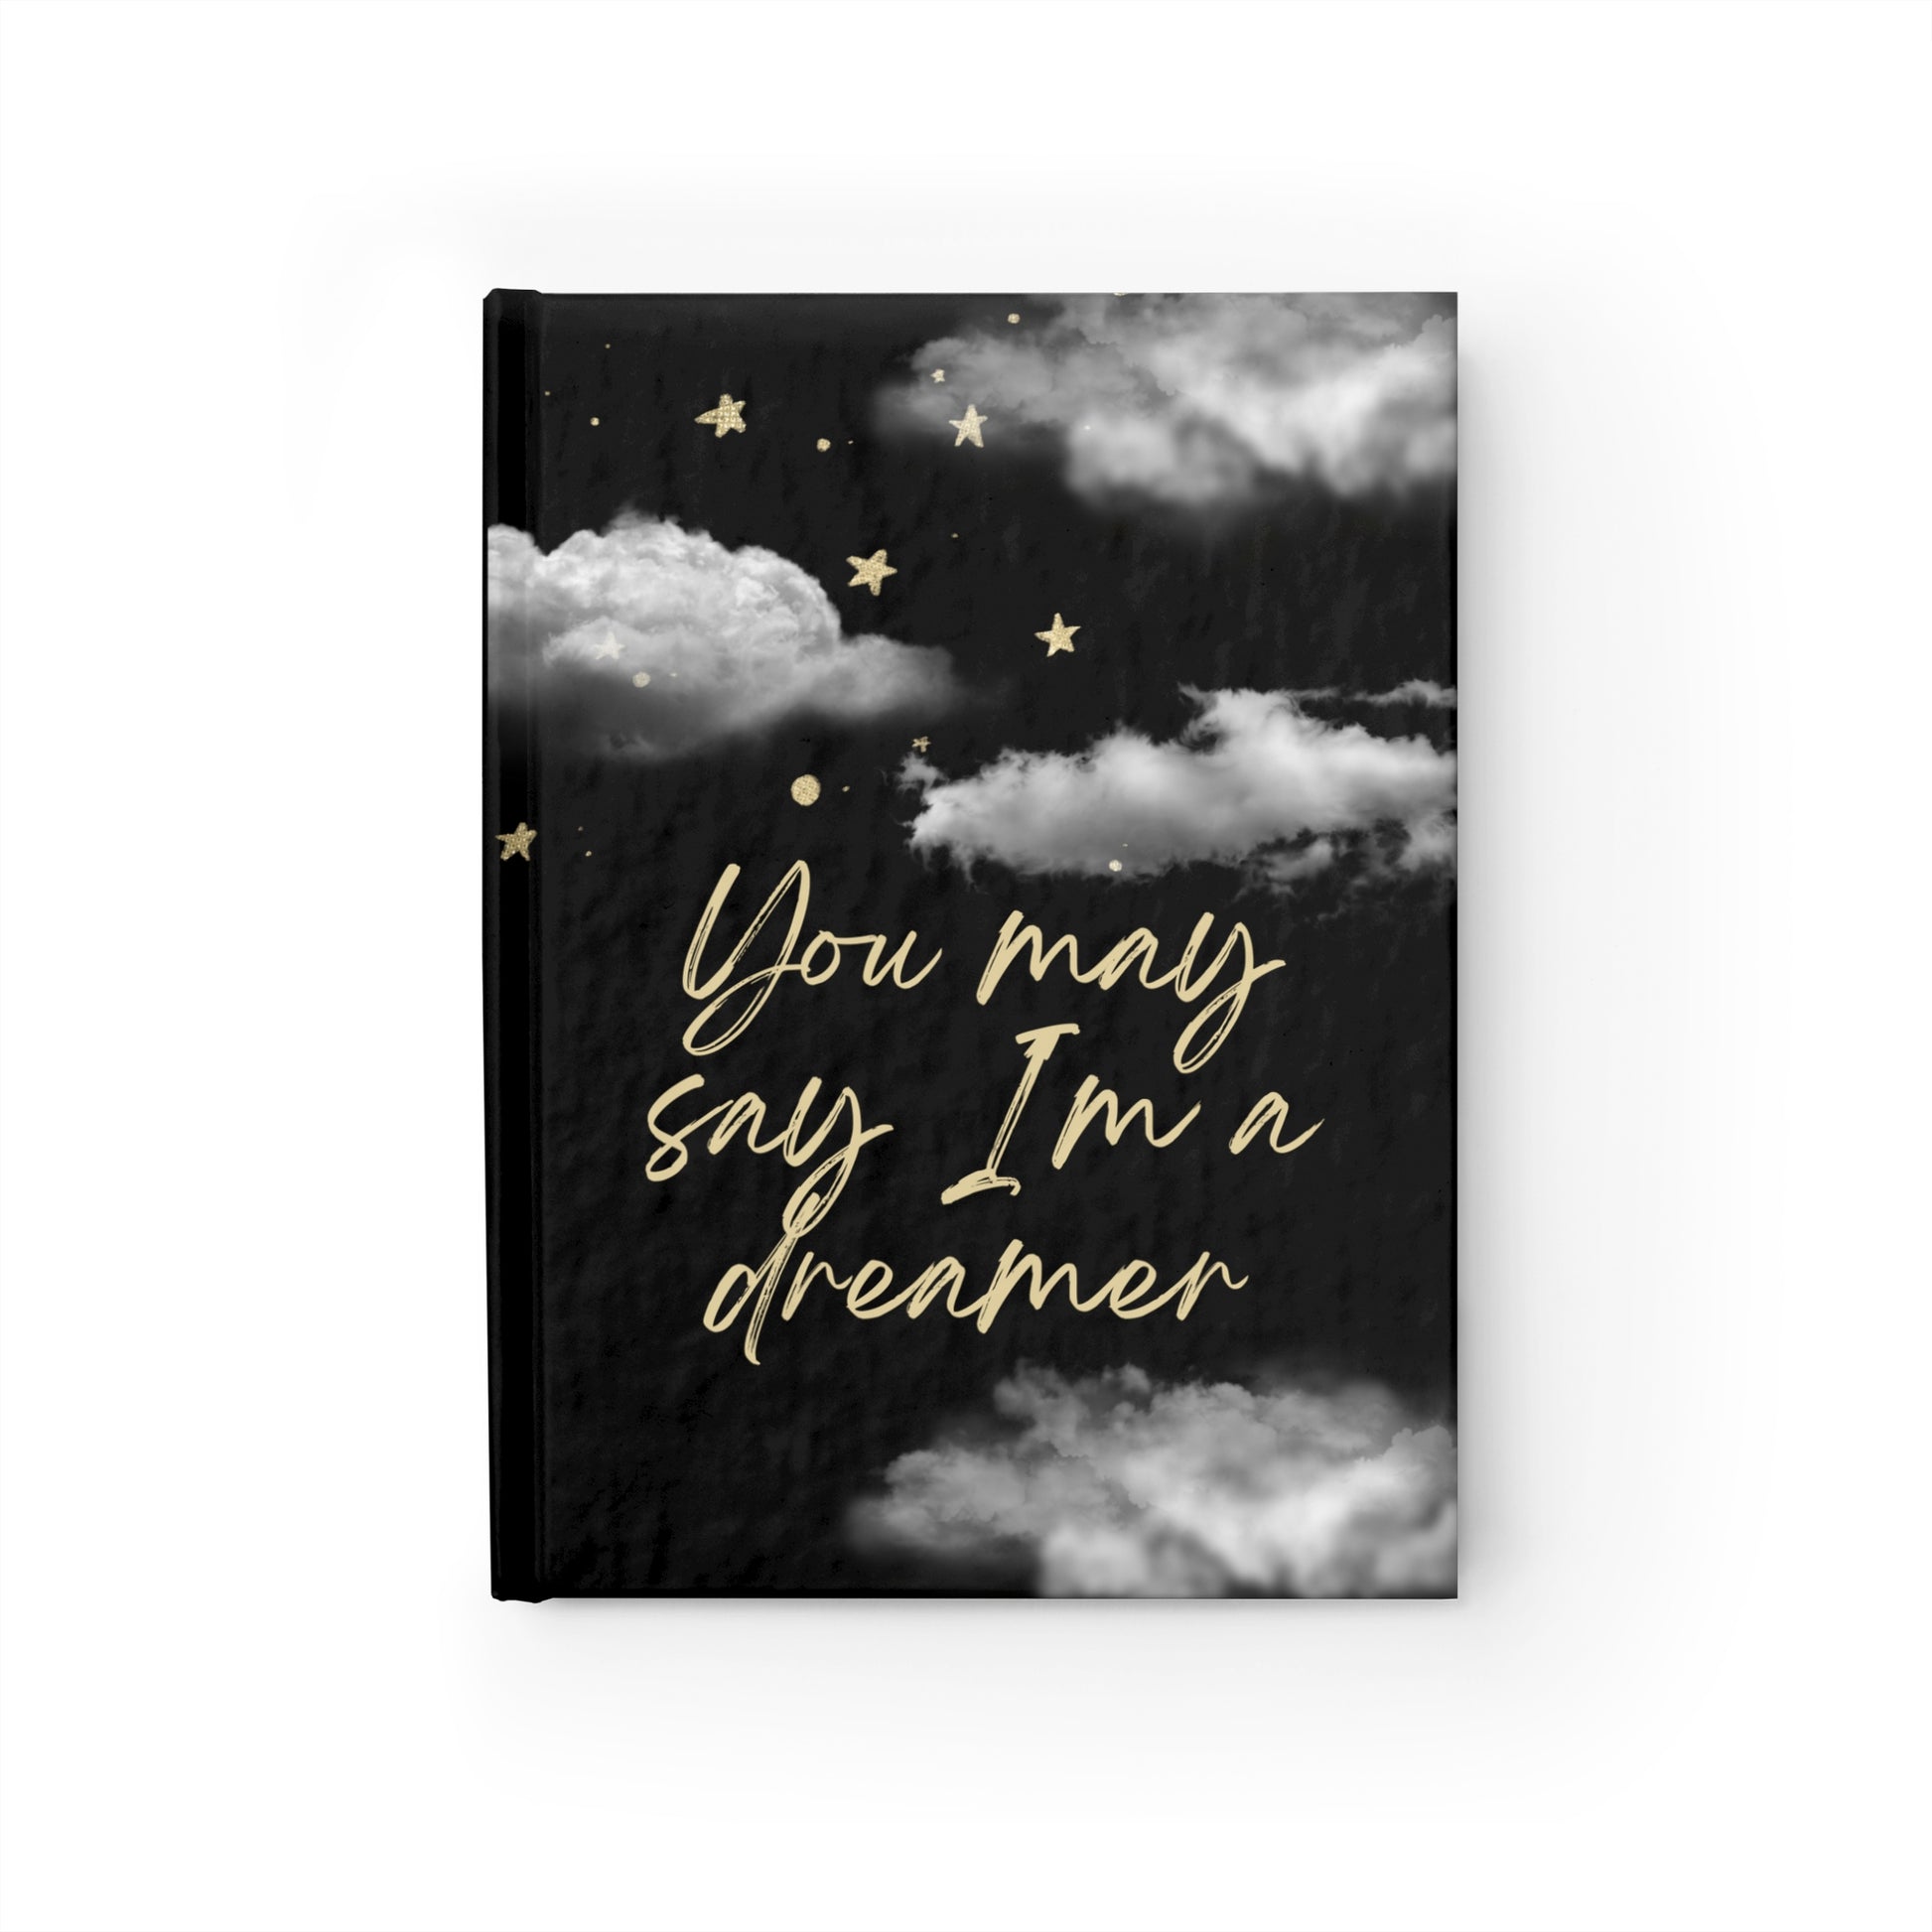 "Not The Only Dreamer" Notebook: A Tribute to John Lennon's "Imagine" - 689 Designs